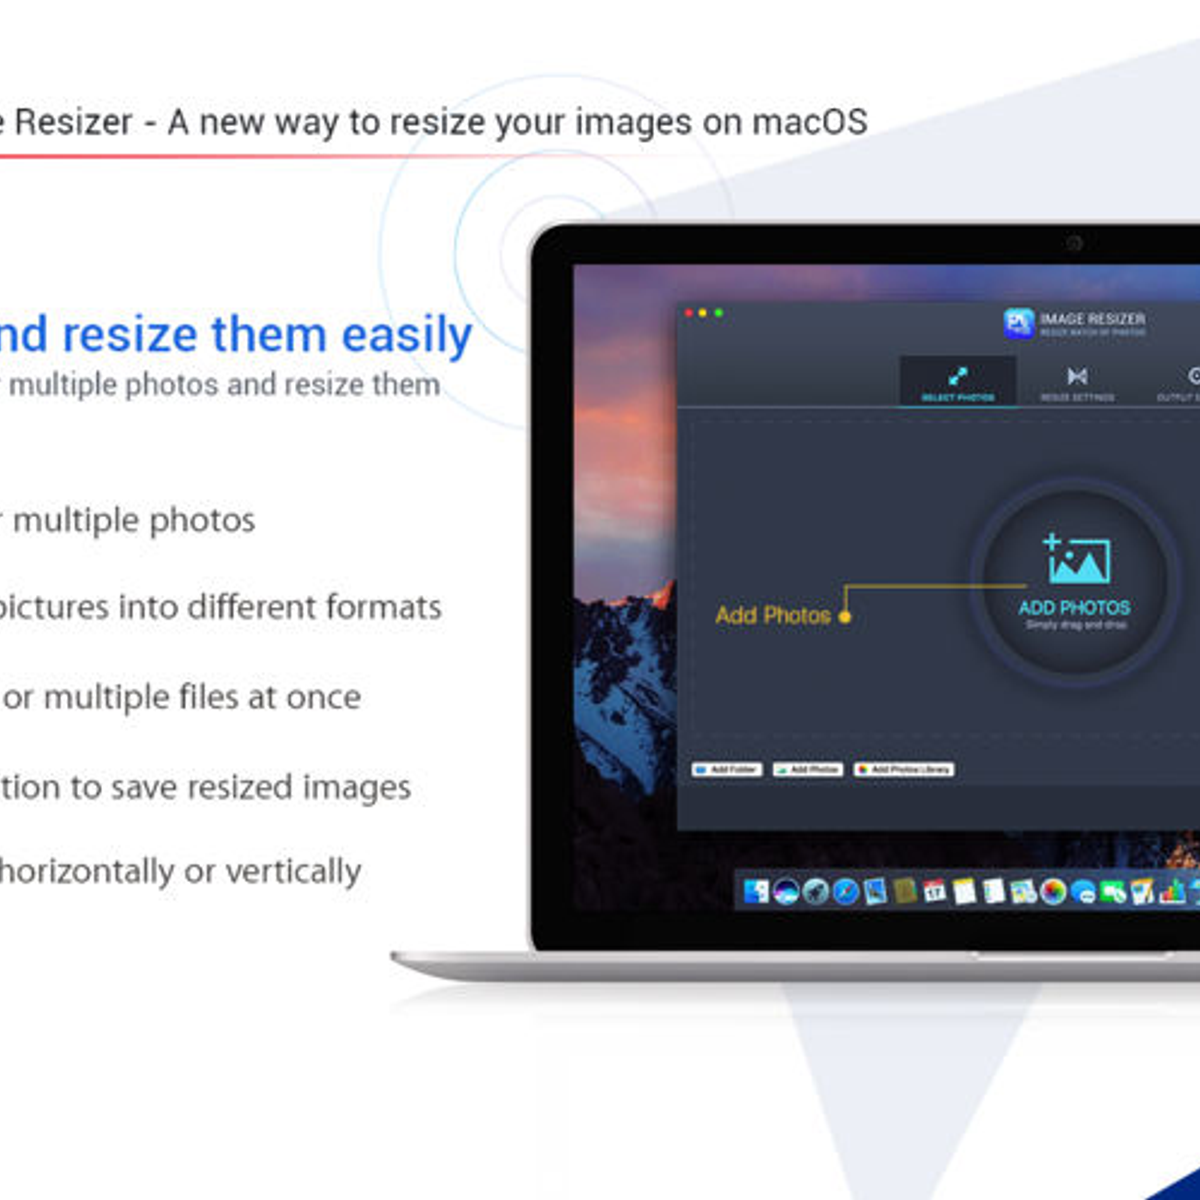 Light Image Resizer 6.0.0.24 With Crack Mac Windows • A podcast on Anchor